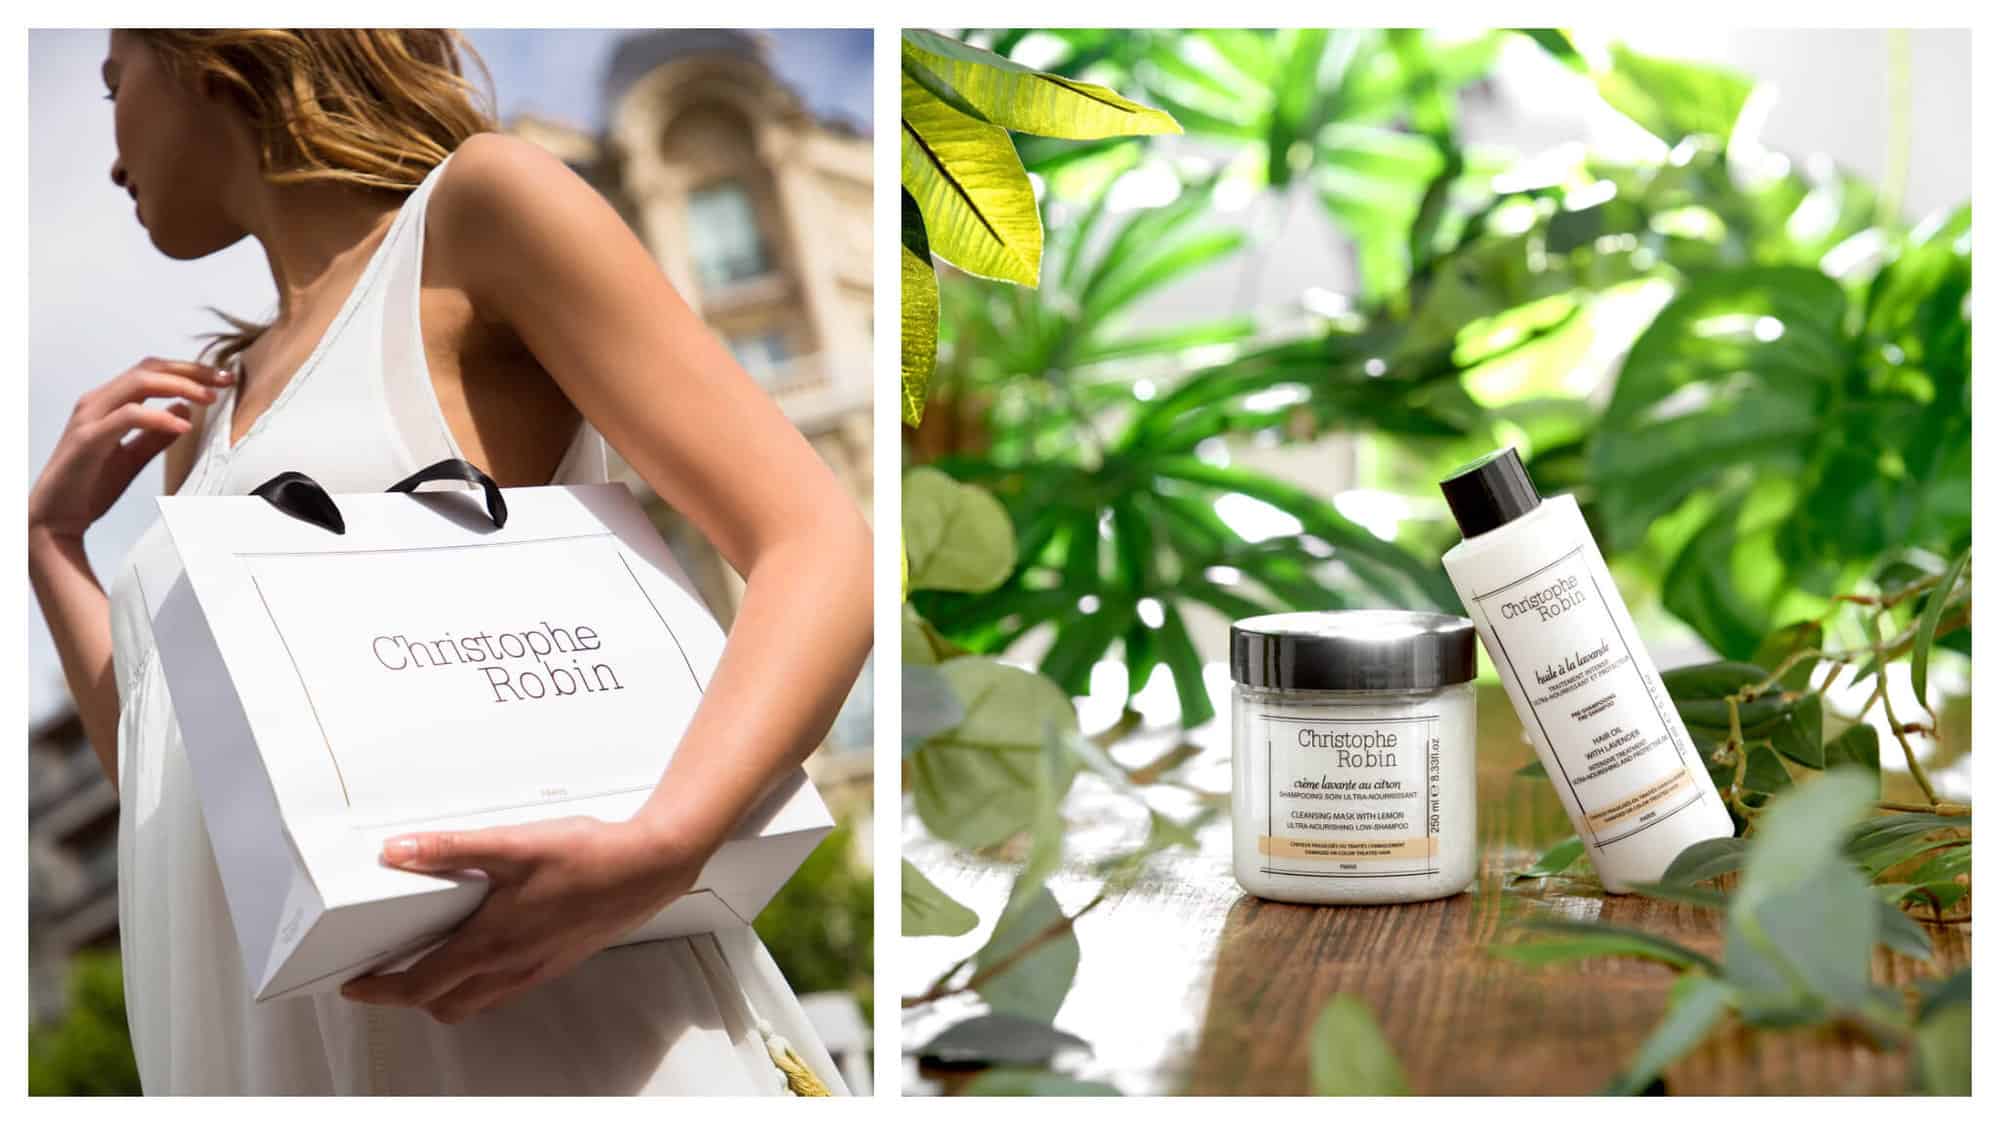 Left: a blonde woman in a white dress holding a bag from Christophe Robin in front of a Parisian building. Right: Two Christophe Robin products on a wooden table surrounded by green plants. 